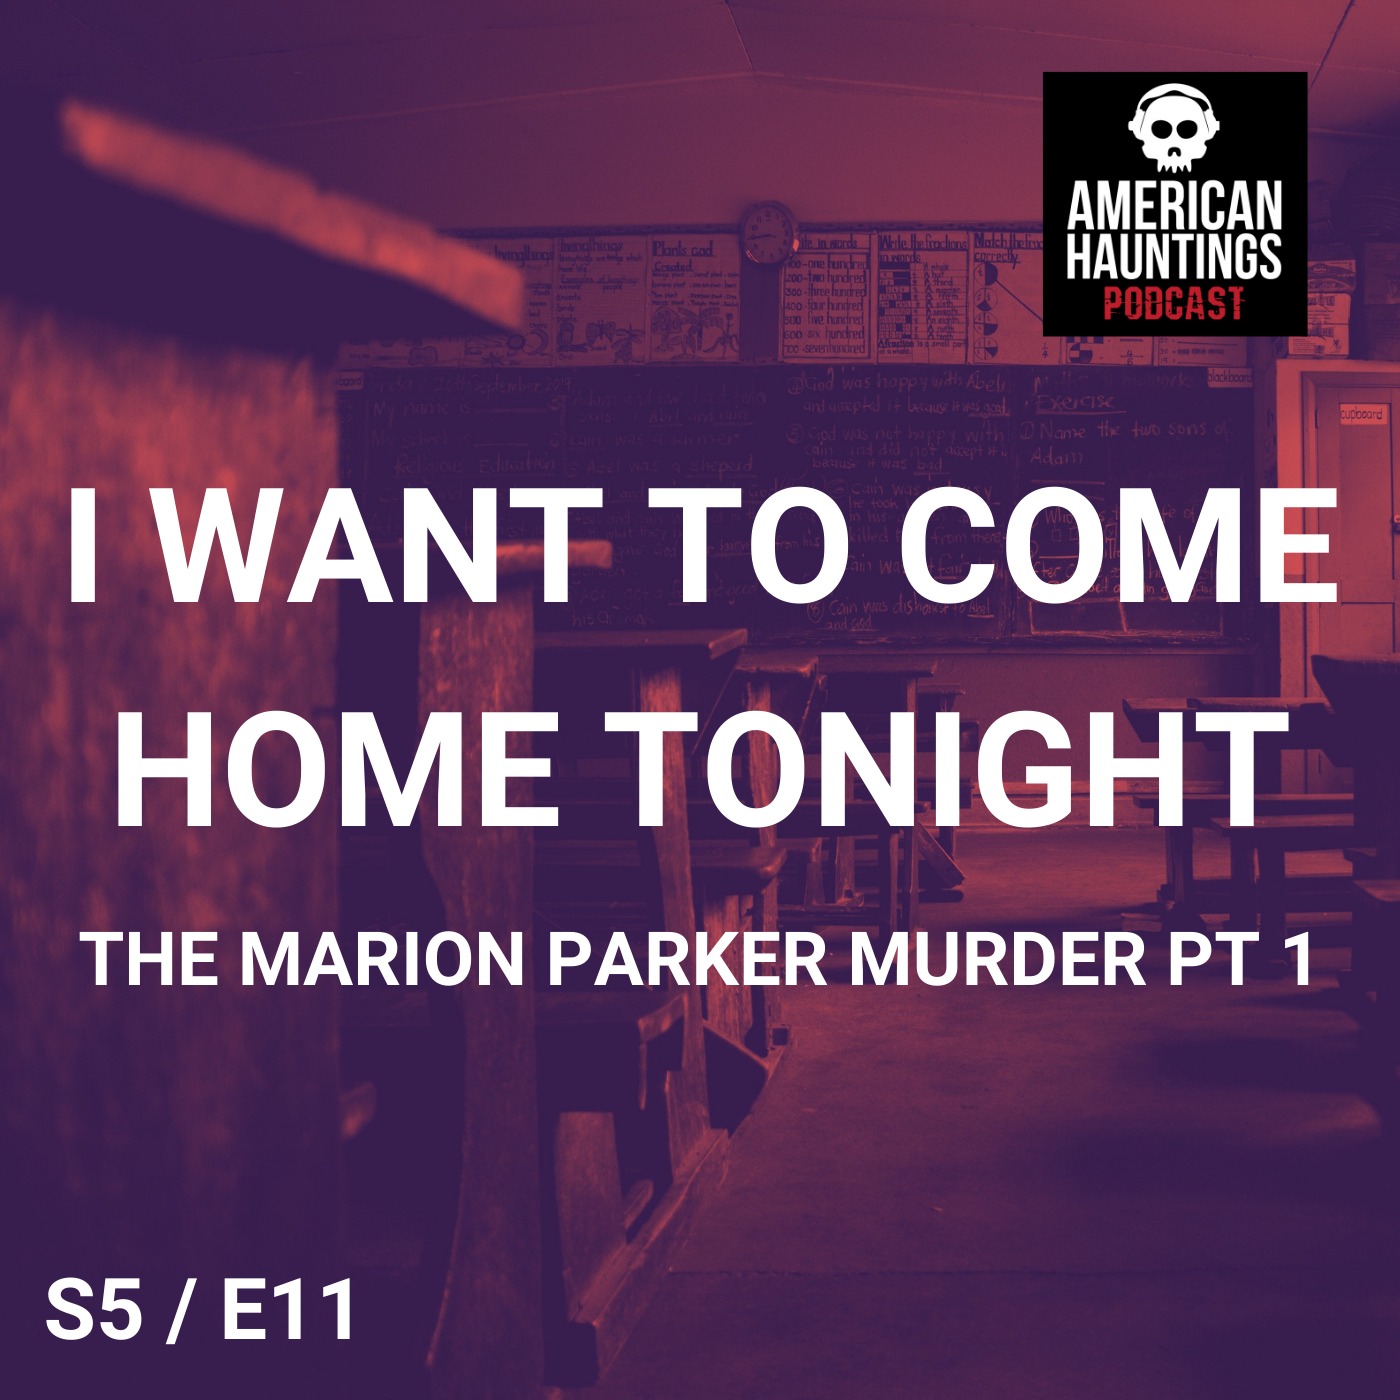 The Marion Parker Murder pt 1 (I Want To Come Home Tonight)